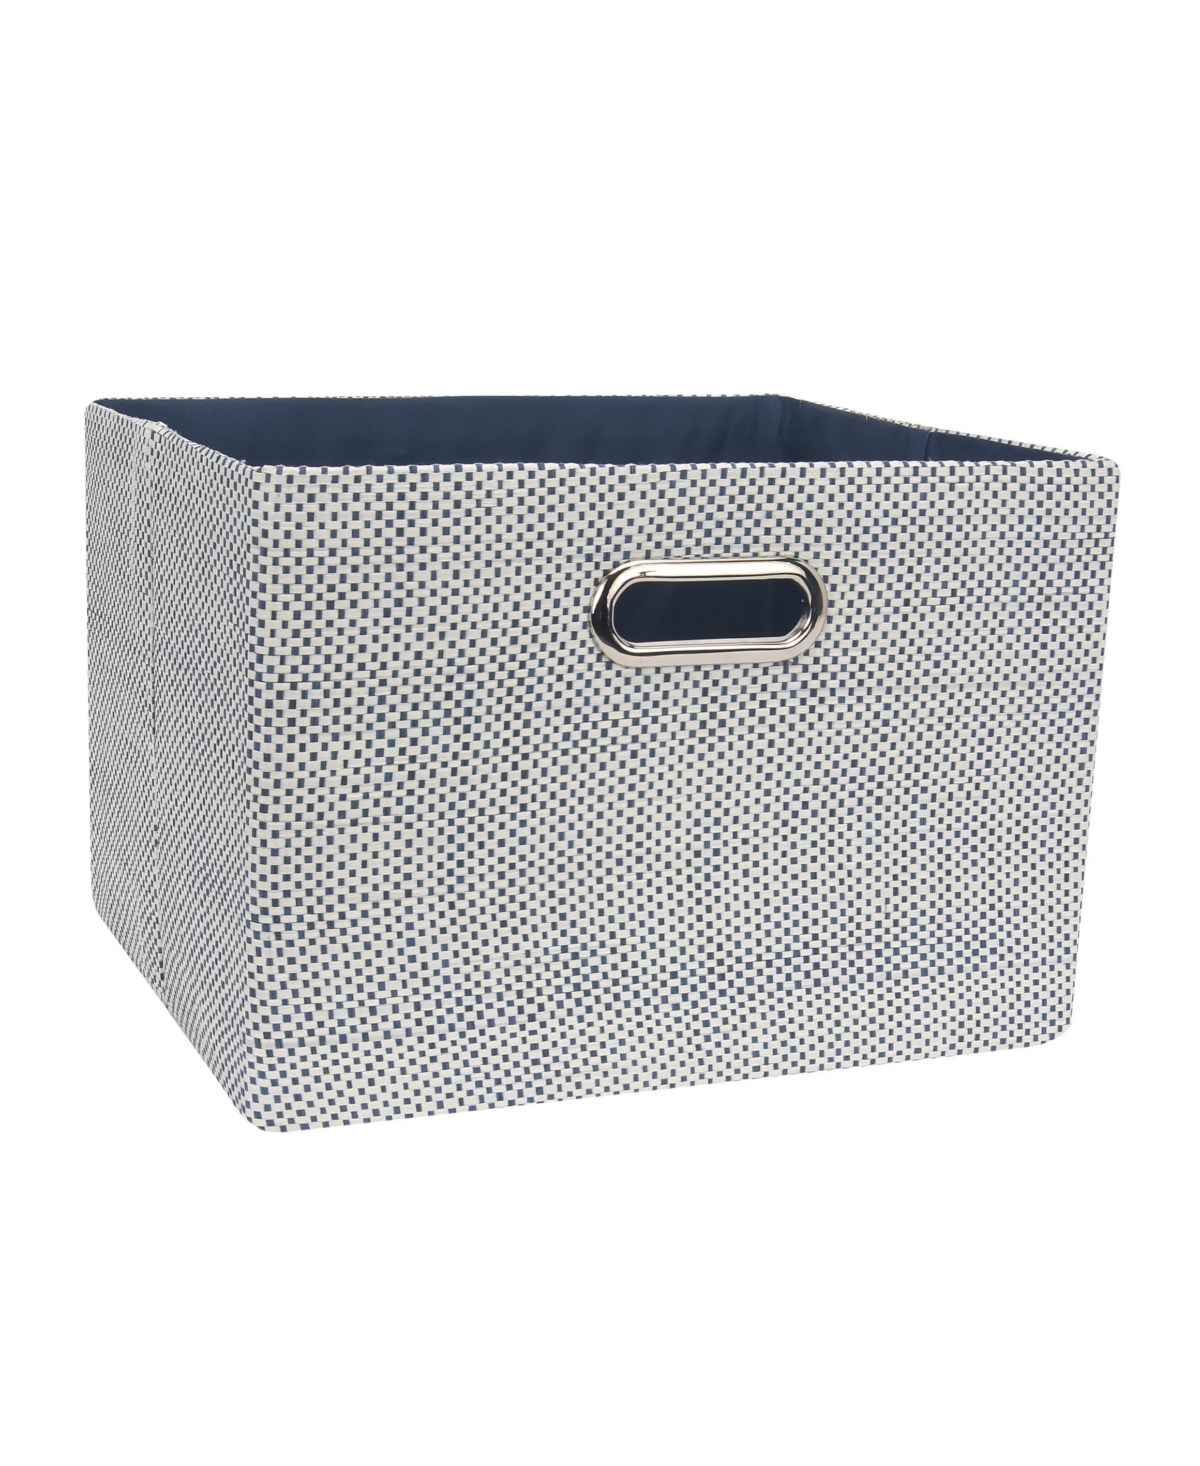 Blue Foldable/Collapsible Storage Bin/Basket Organizer with Handles - Blue